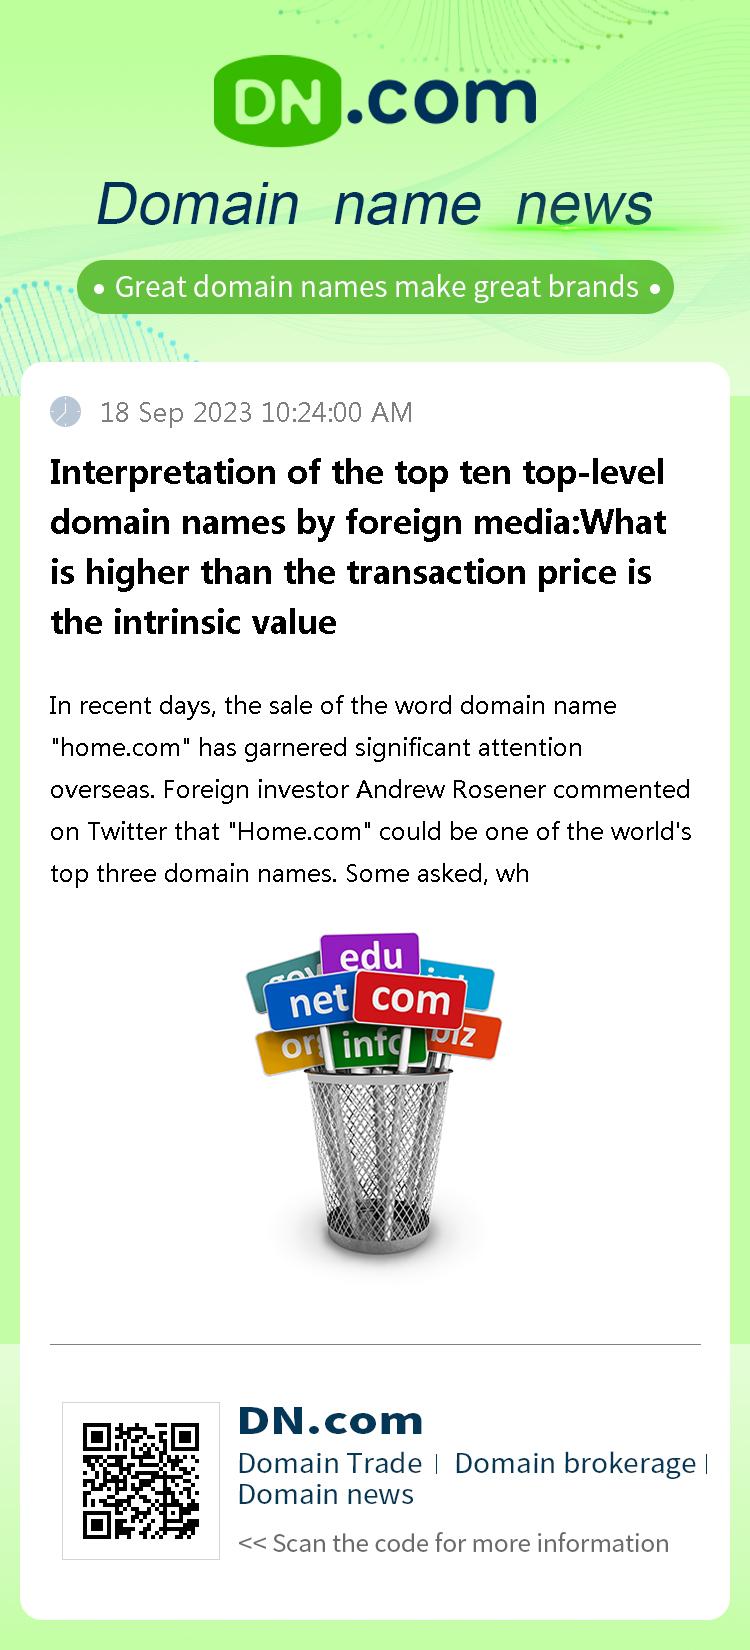 Interpretation of the top ten top-level domain names by foreign media:What is higher than the transaction price is the intrinsic value